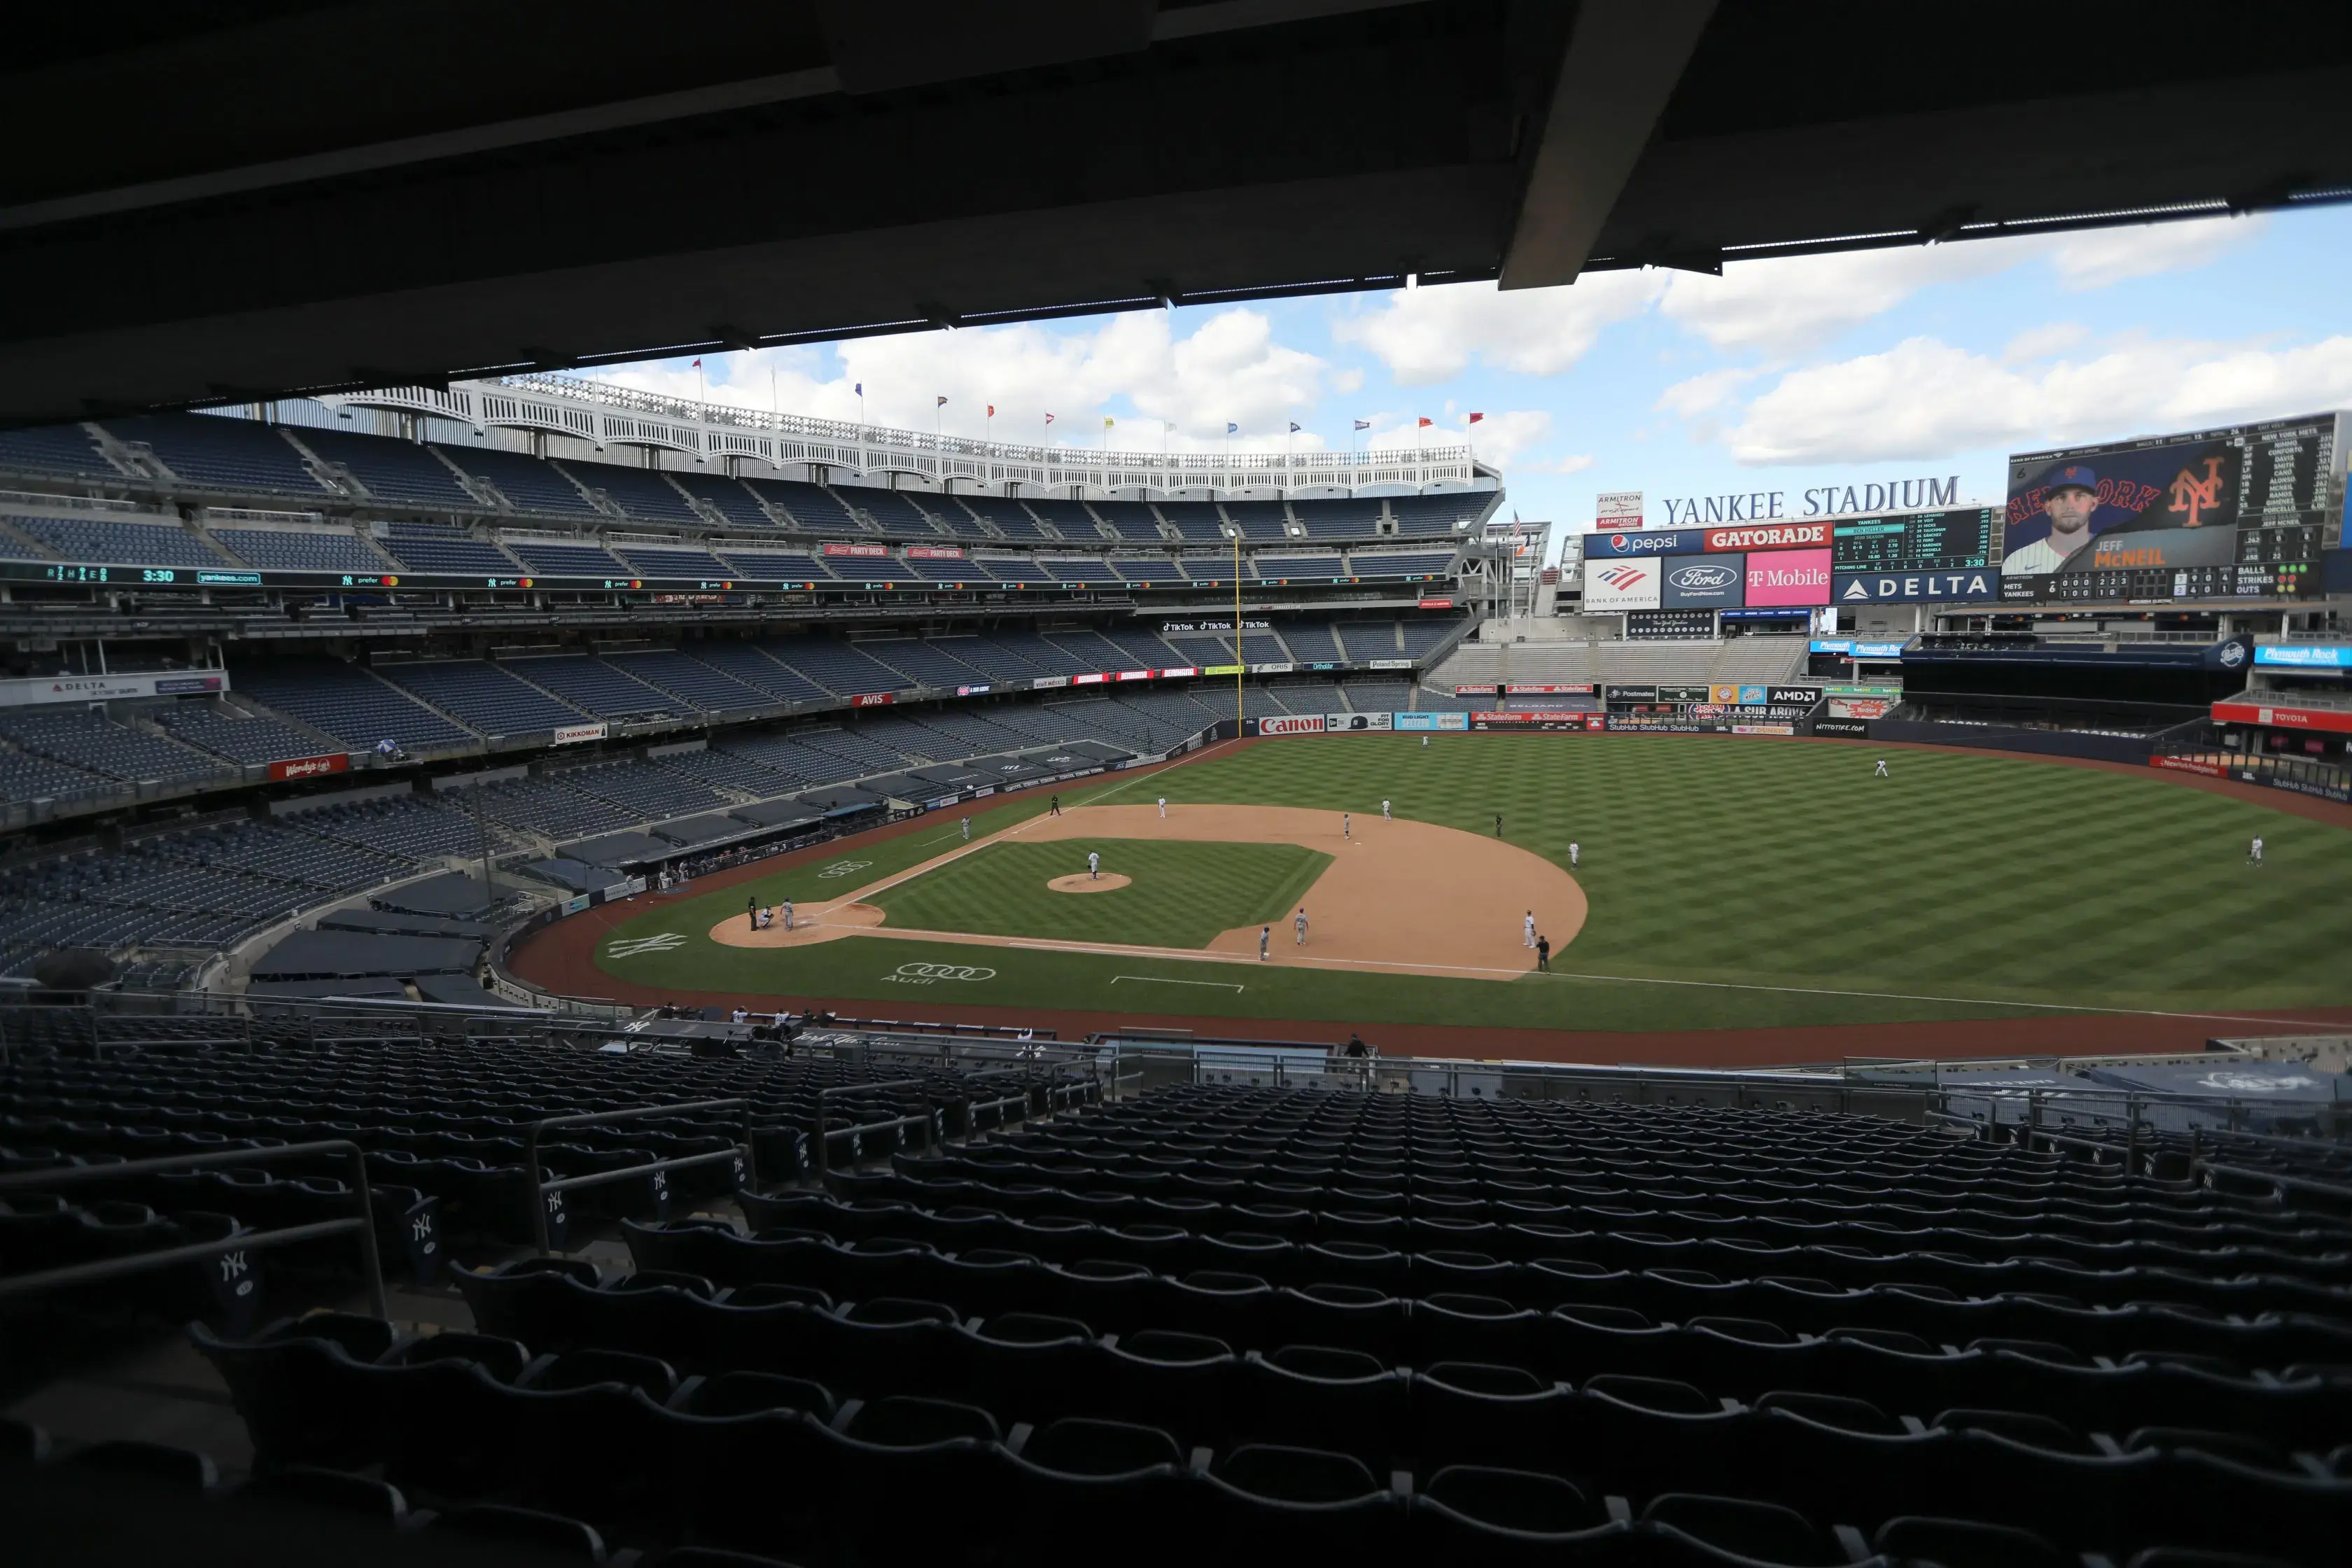 A general view of Yankee Stadium as the Mets face the Yankees